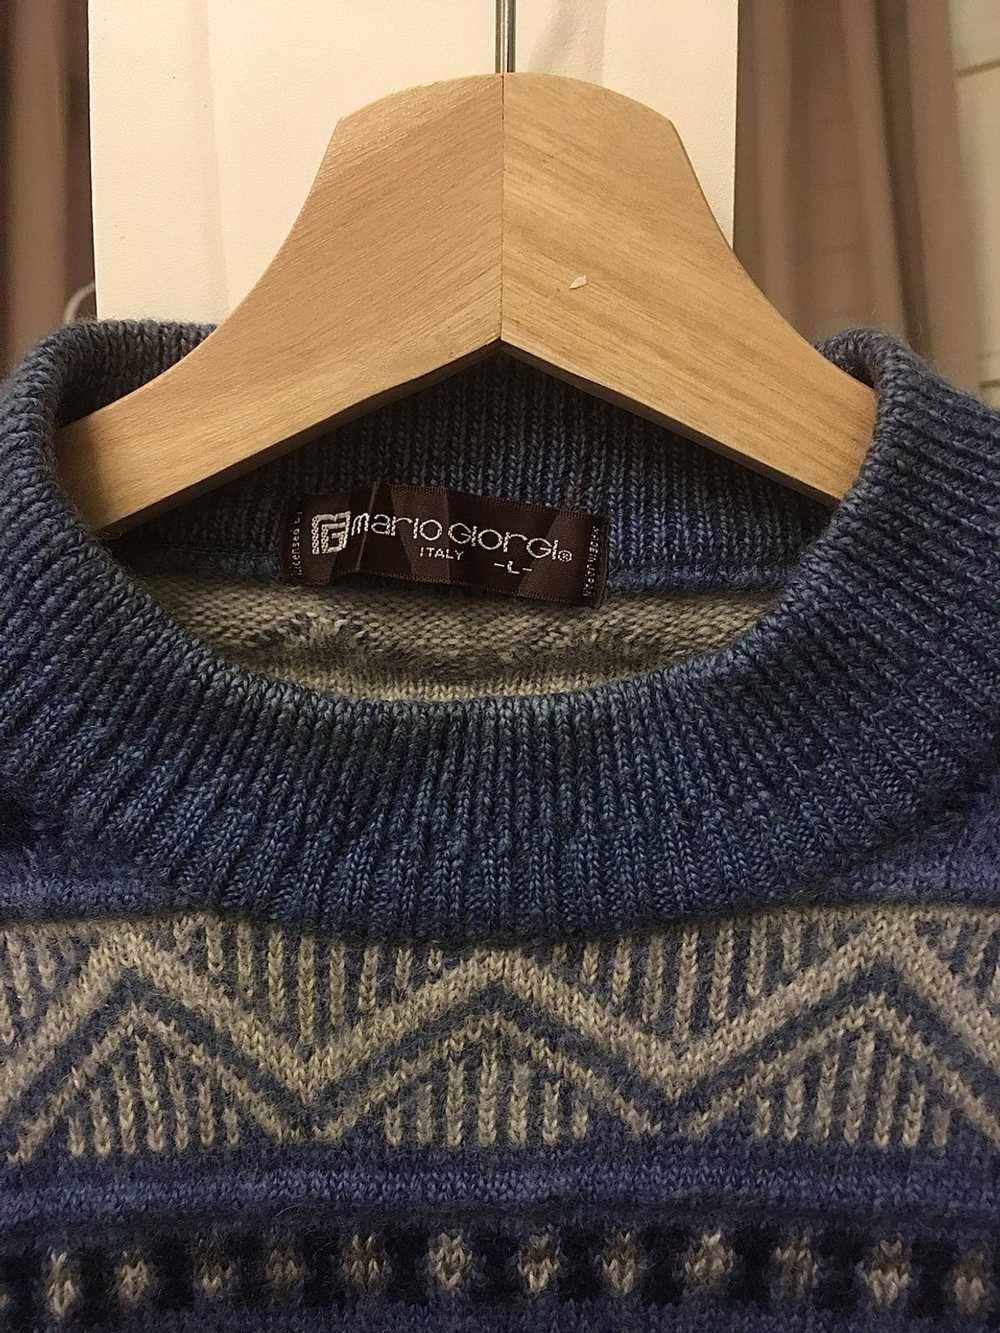 Coloured Cable Knit Sweater × Italian Designers ×… - image 11